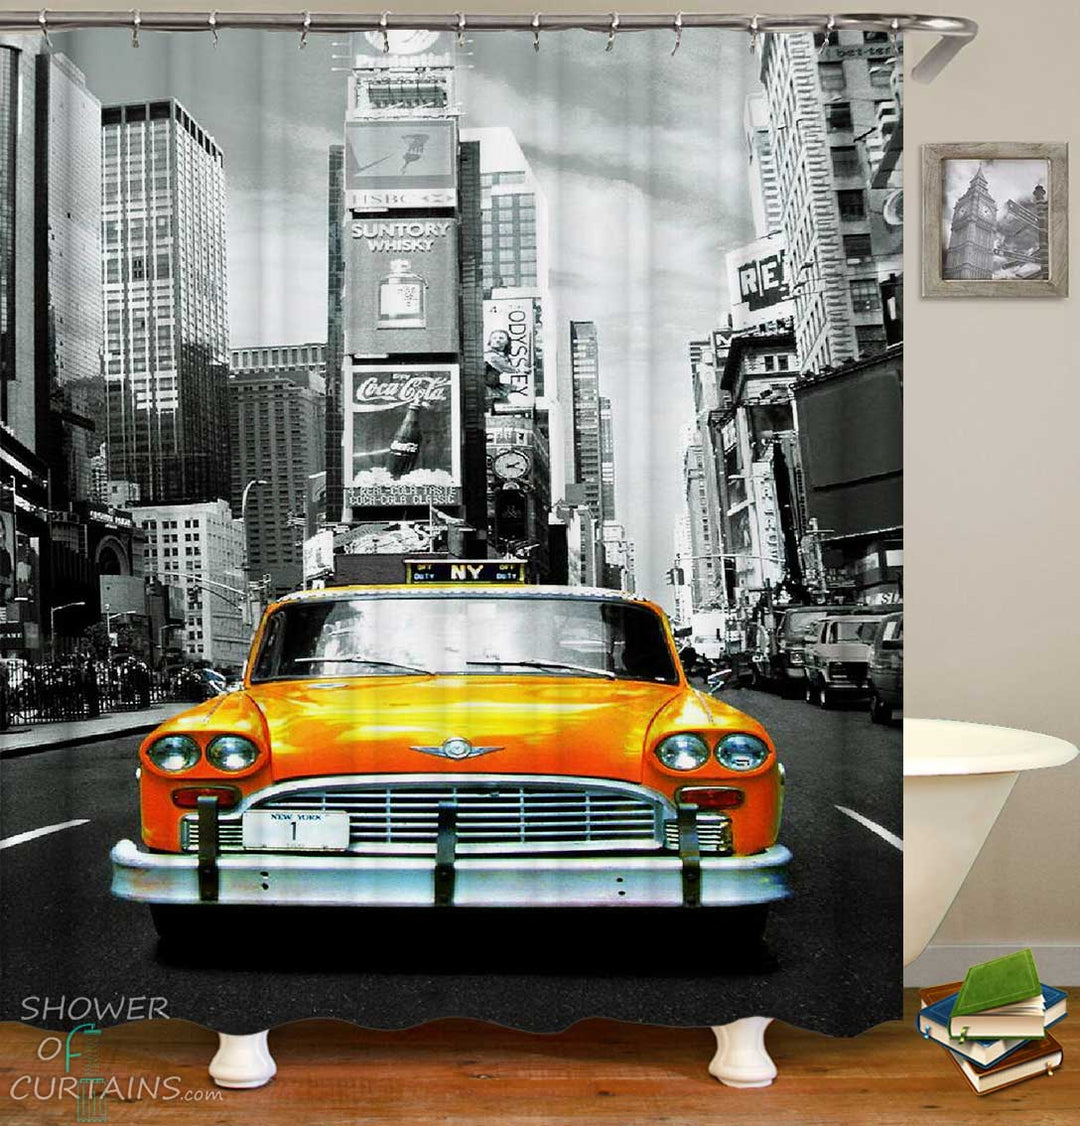 Shower Curtains with New York City Taxi Cab